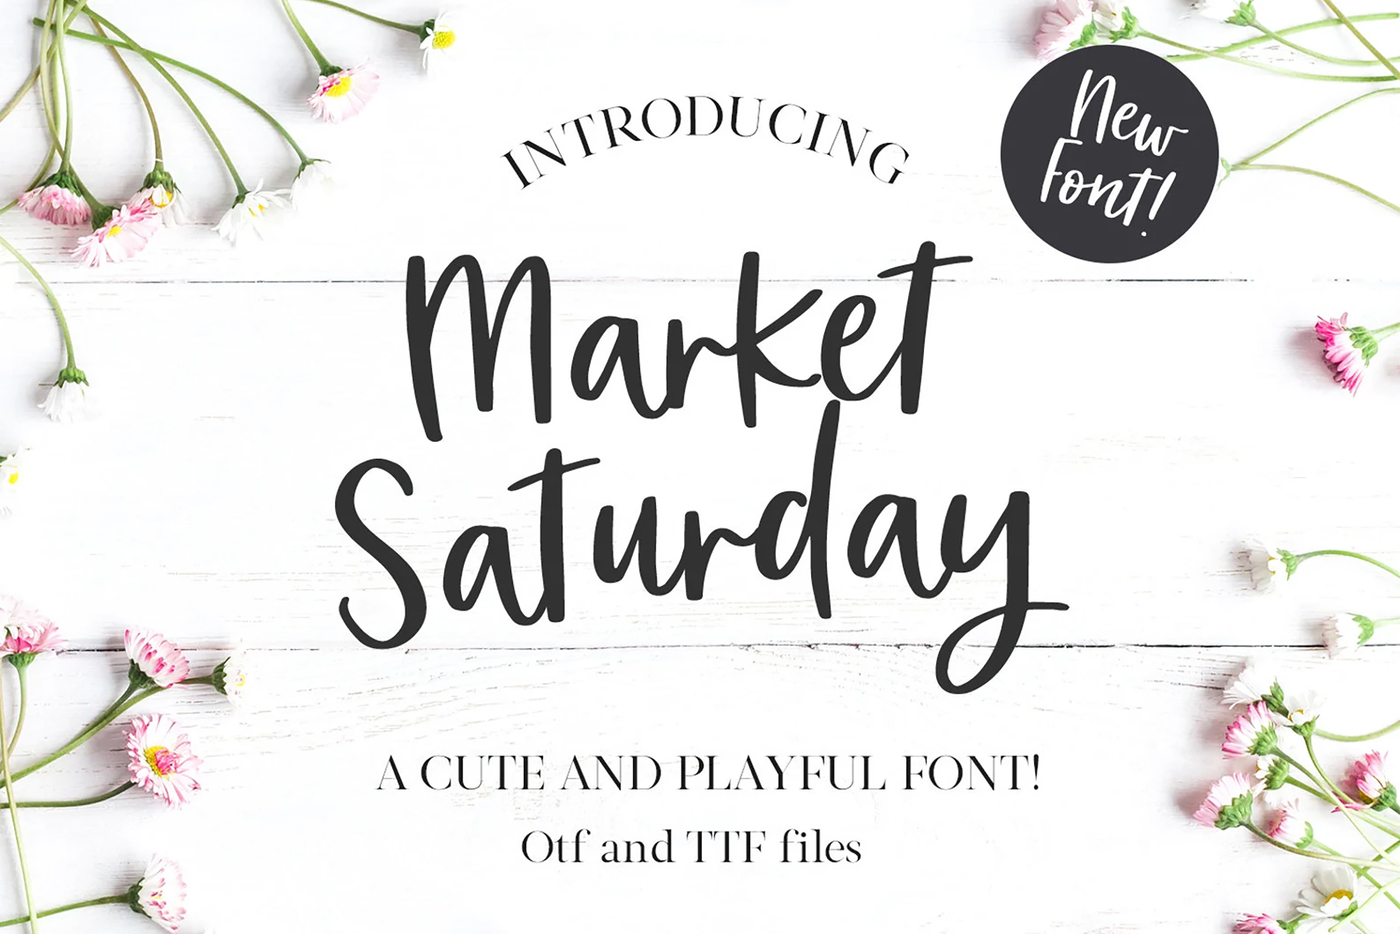 Market Saturday Font main product image by Nicky Laatz